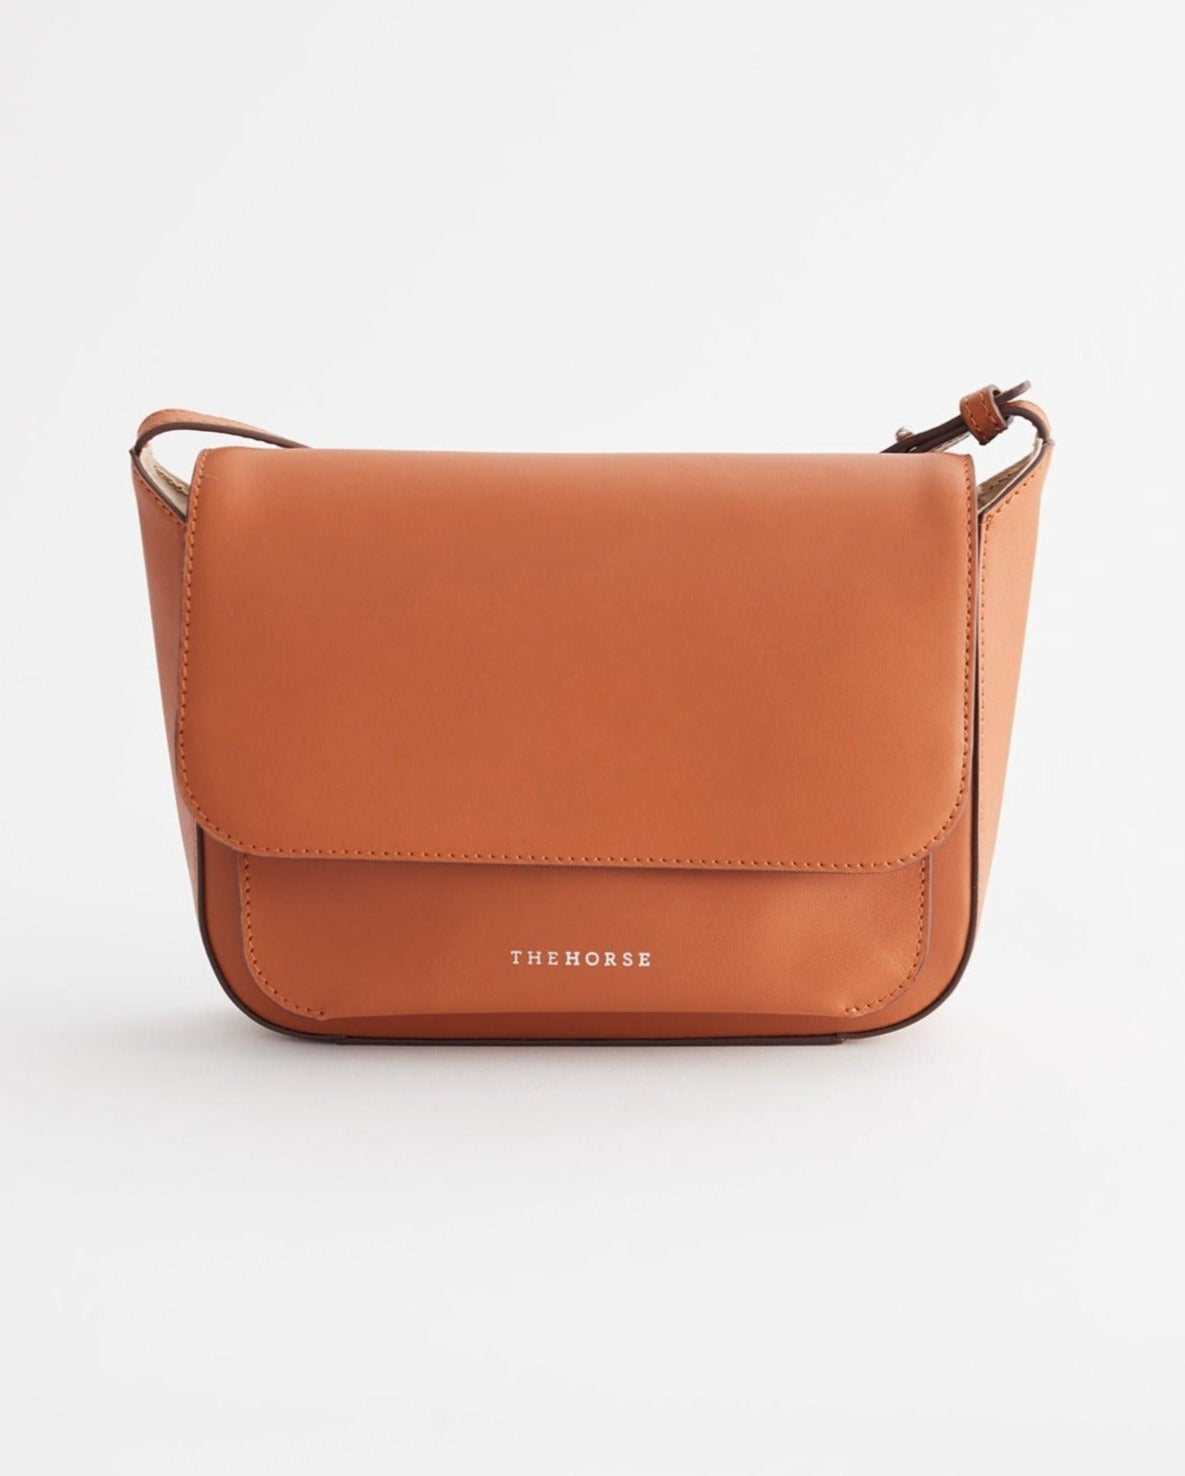 The Medium Remmy Bag: Leather Shoulder Bag in Tan by The Horse®